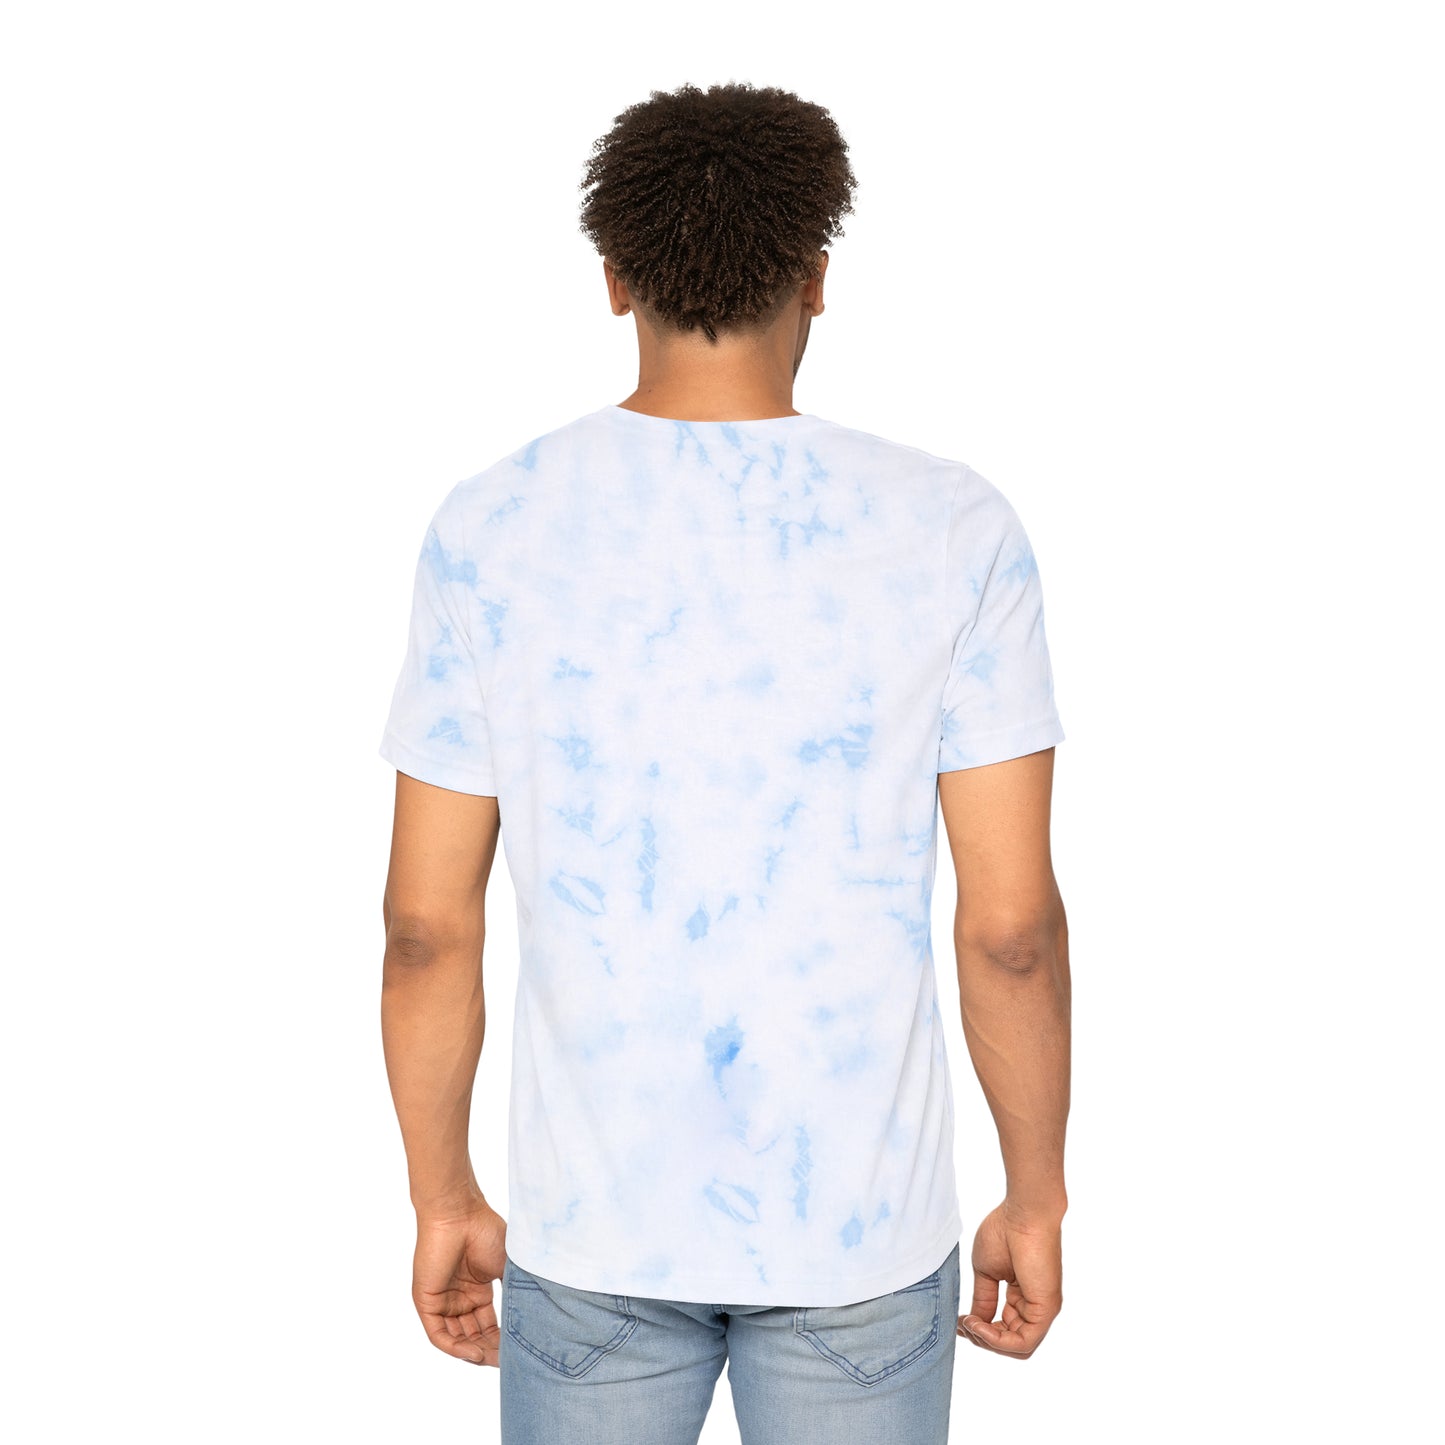 Mountain Lion Tie-Dyed T-Shirt